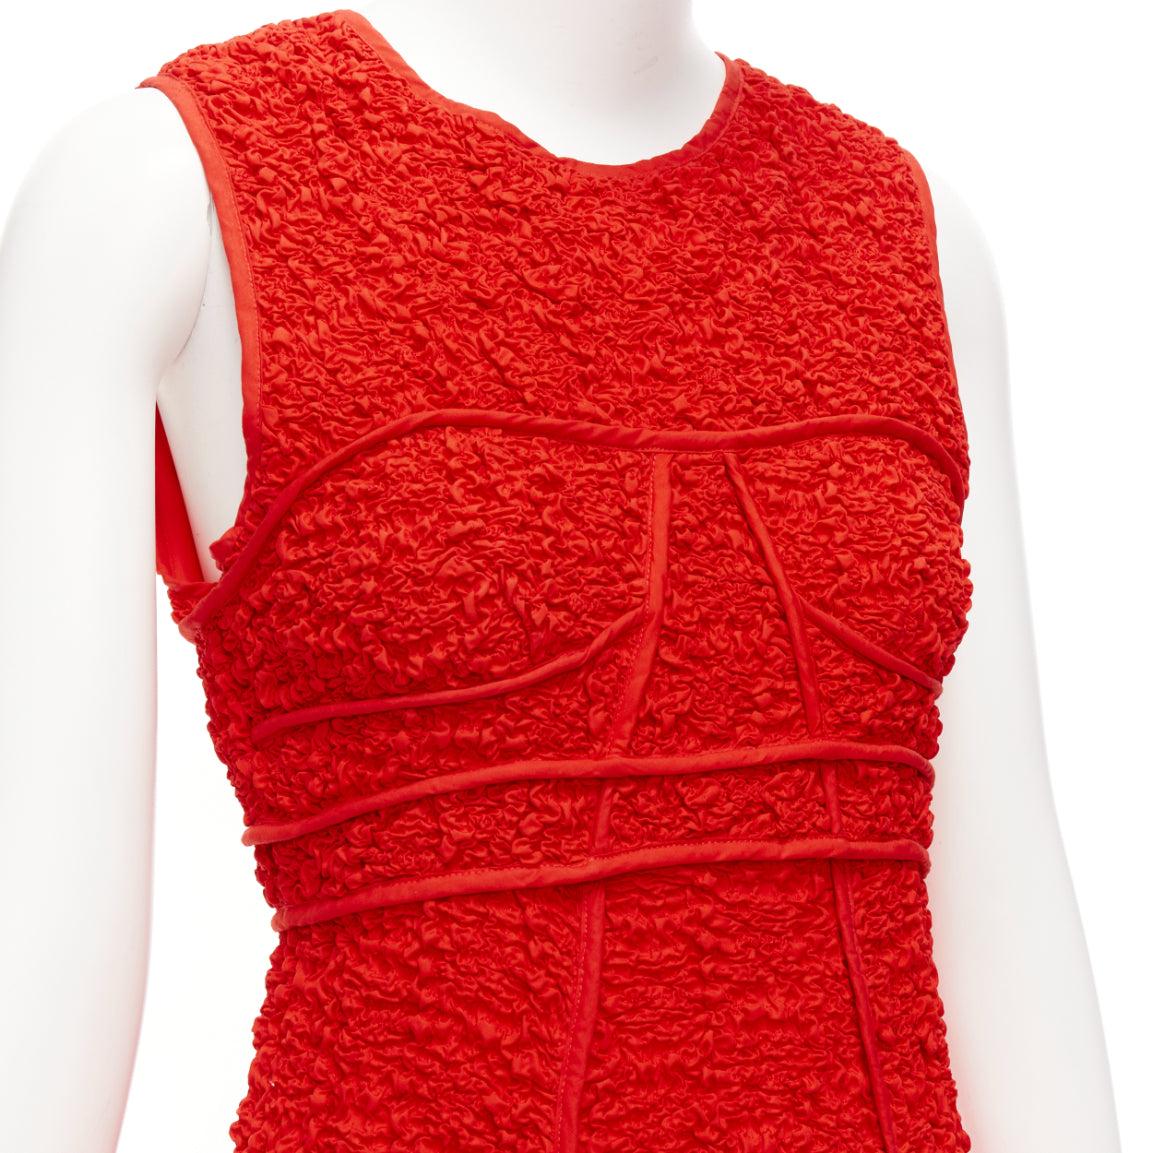 CECILIE BAHNSEN Lia red cotton blend cloque panelled fitted midi dress UK8 S
Reference: LNKO/A02335
Brand: Cecilie Bahnsen
Model: Lia
Material: Cotton, Blend
Color: Red
Pattern: Solid
Closure: Zip
Lining: Red Fabric
Extra Details: poppy red stretch